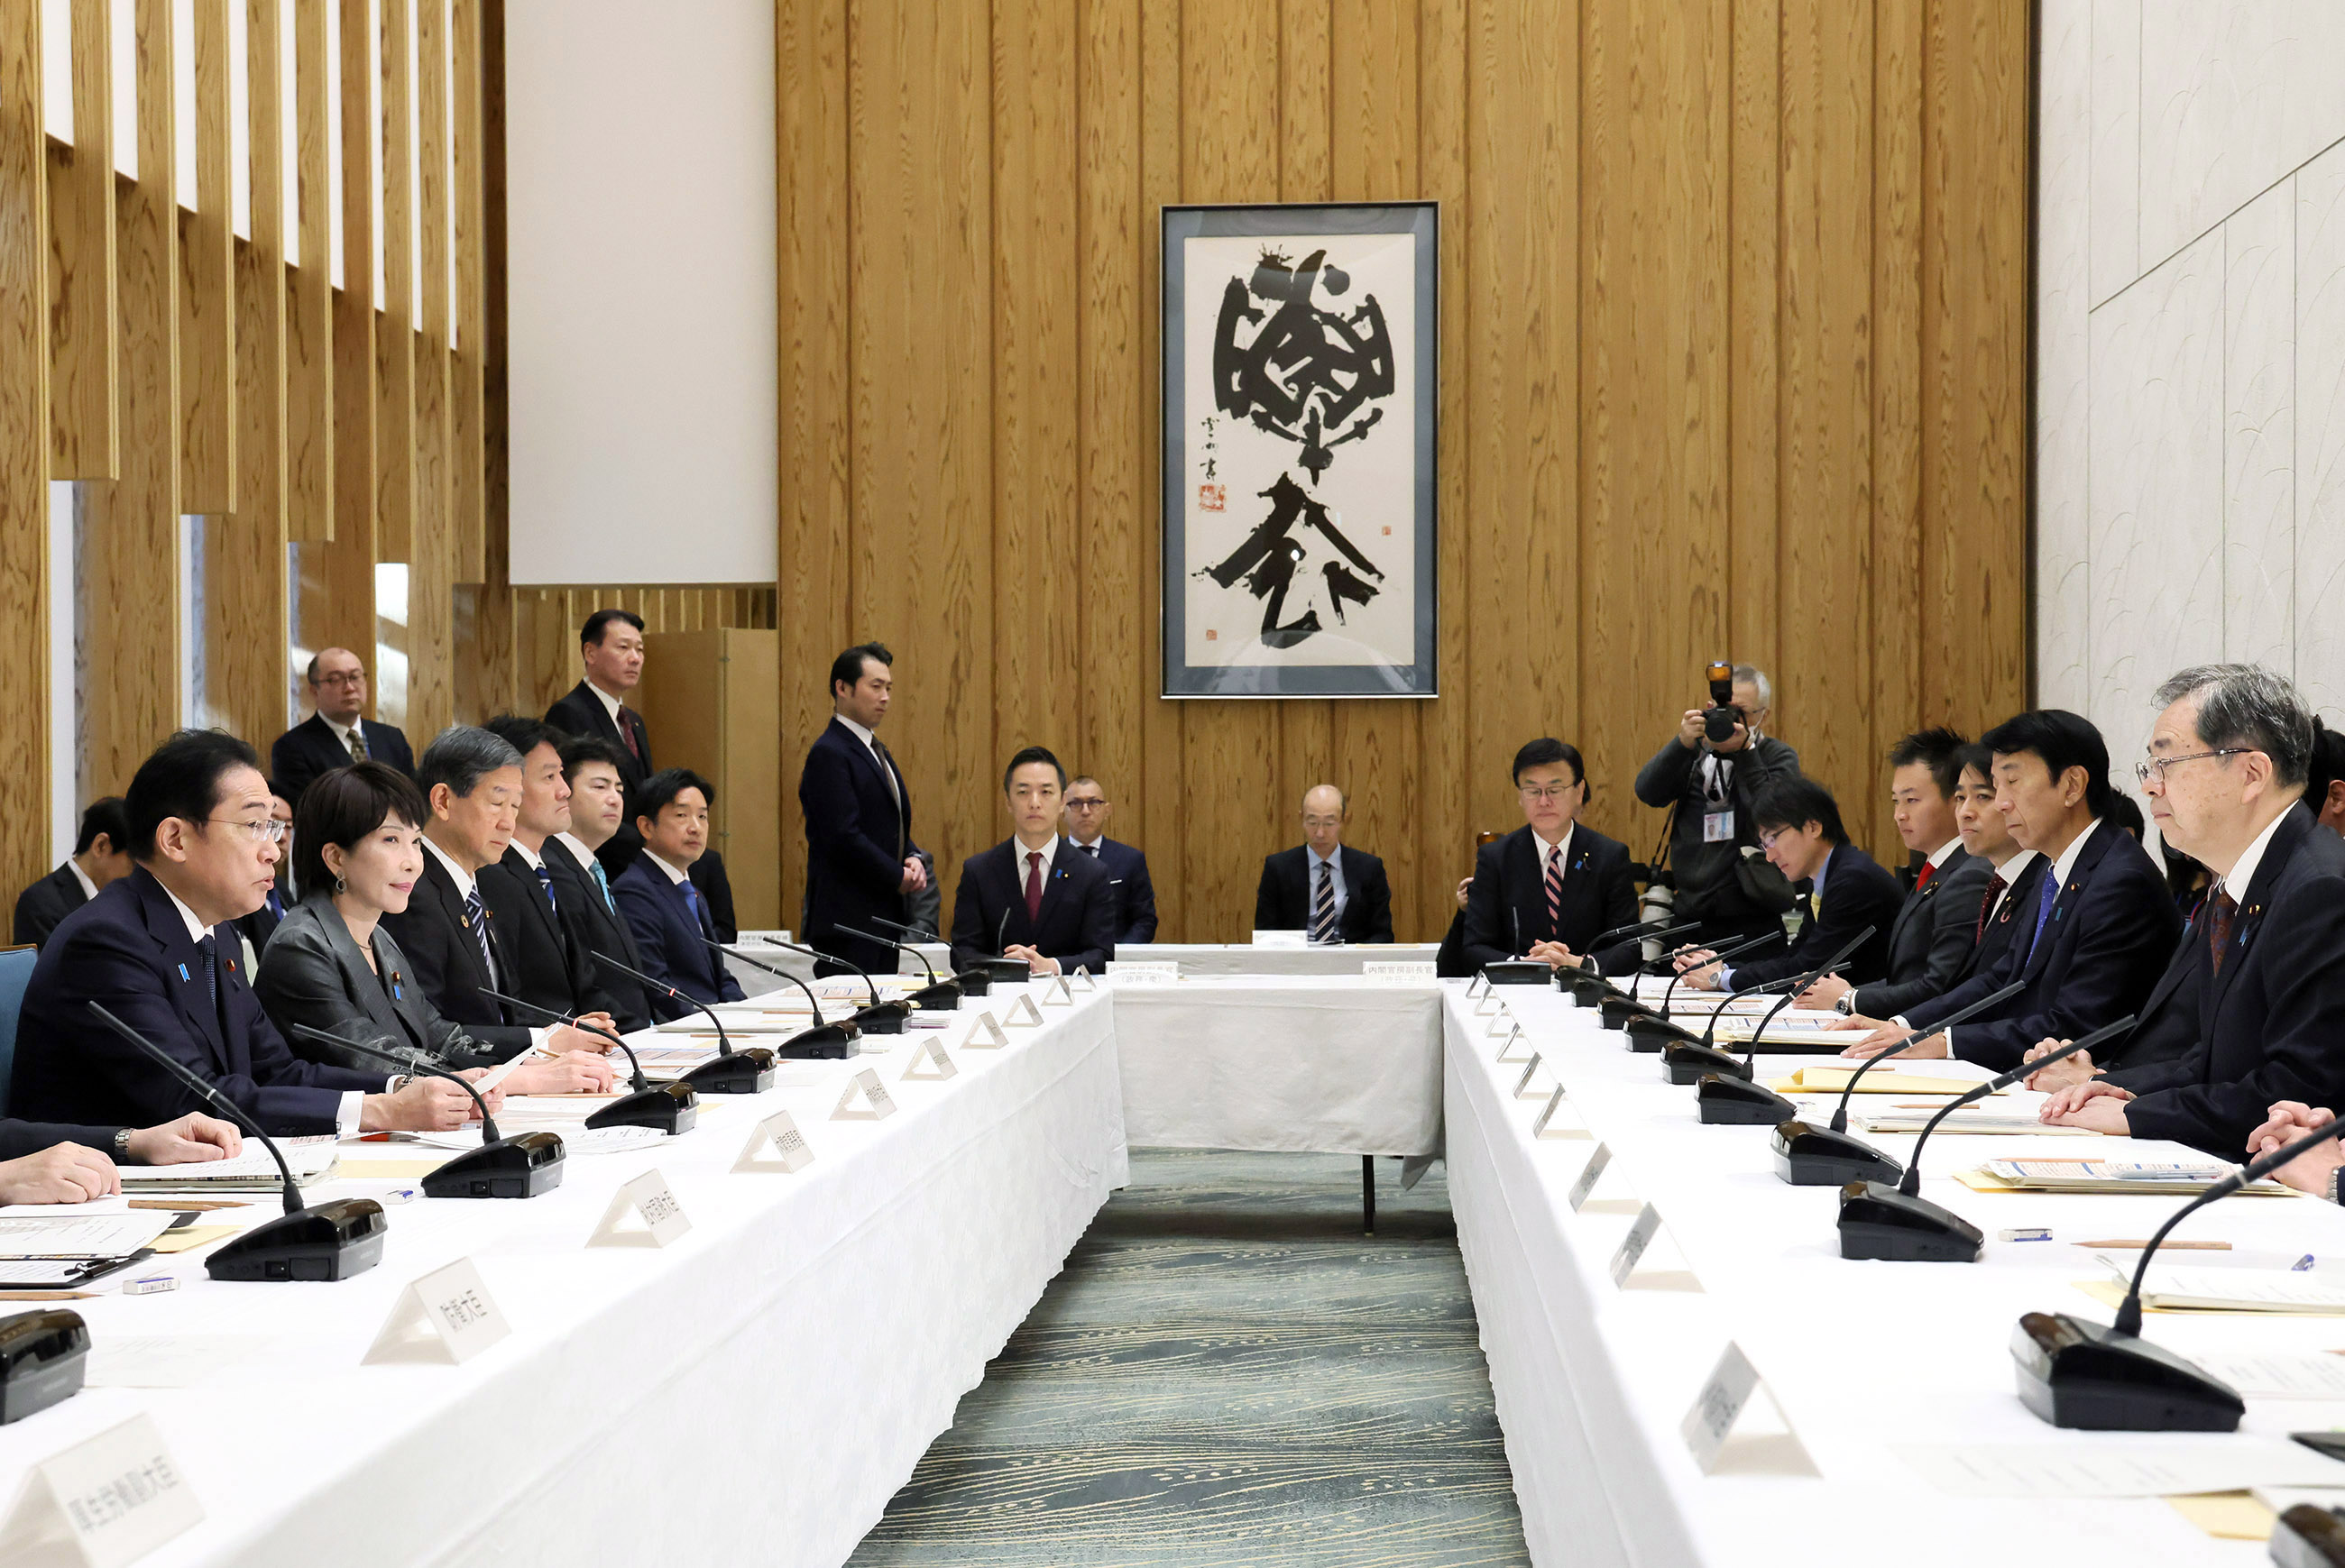 Prime Minister wrapping up a meeting (3)